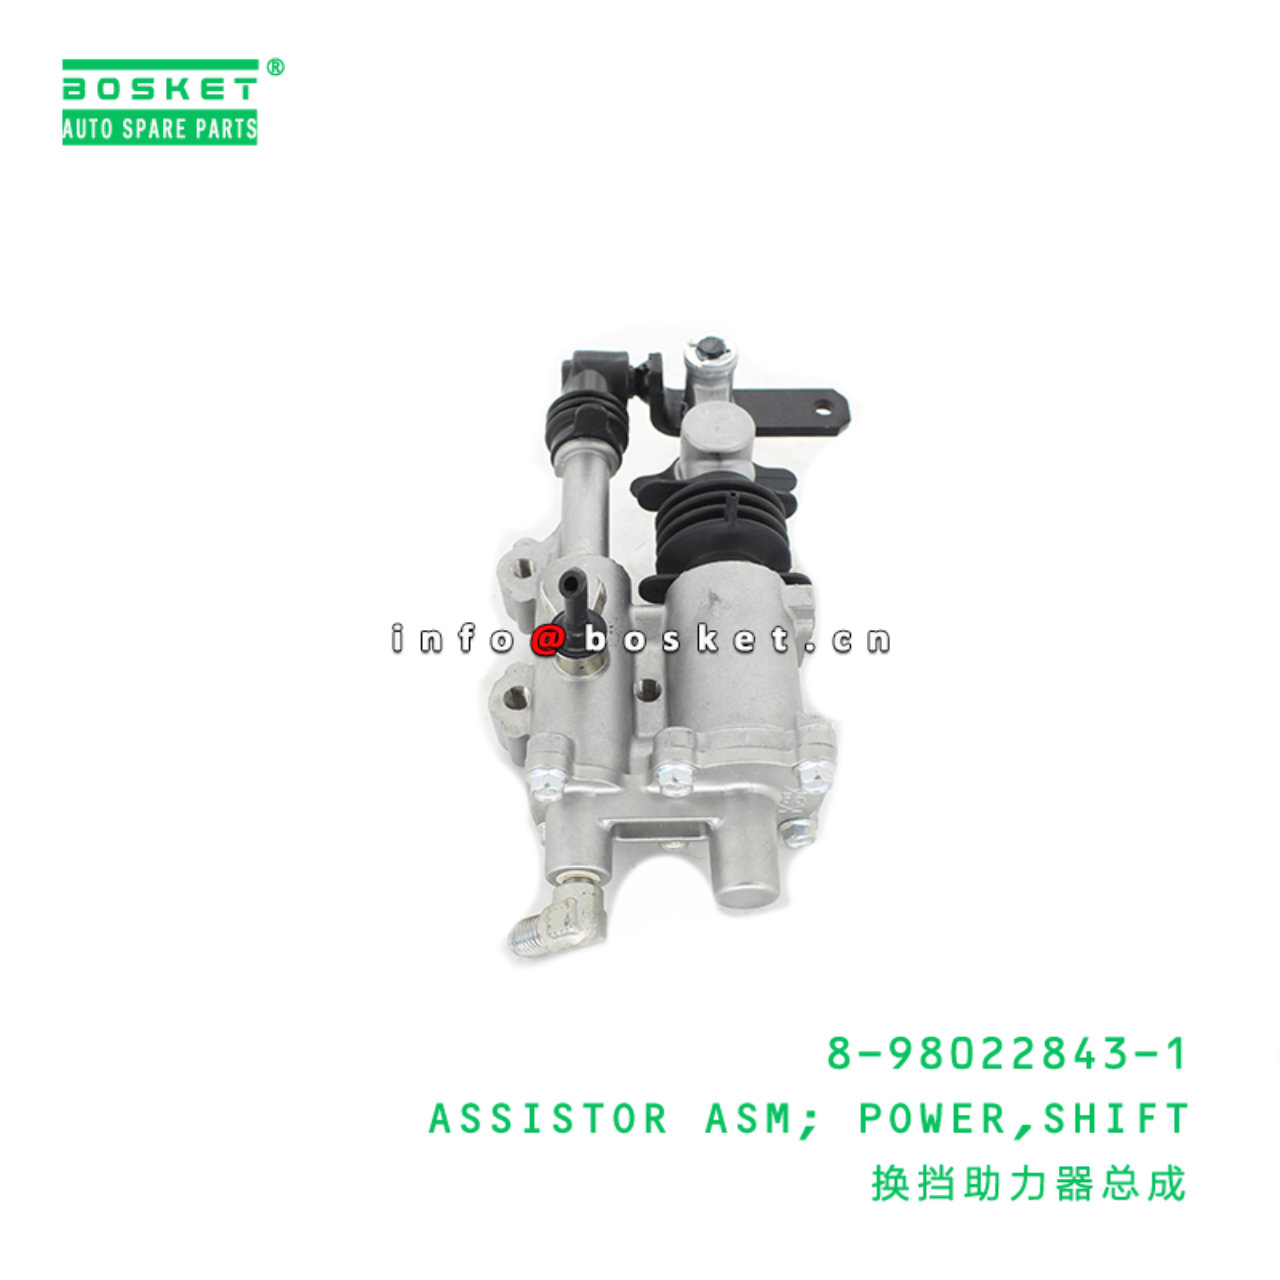 8-98022843-1 Shift Power Assistor Assembly Suitable for ISUZU 